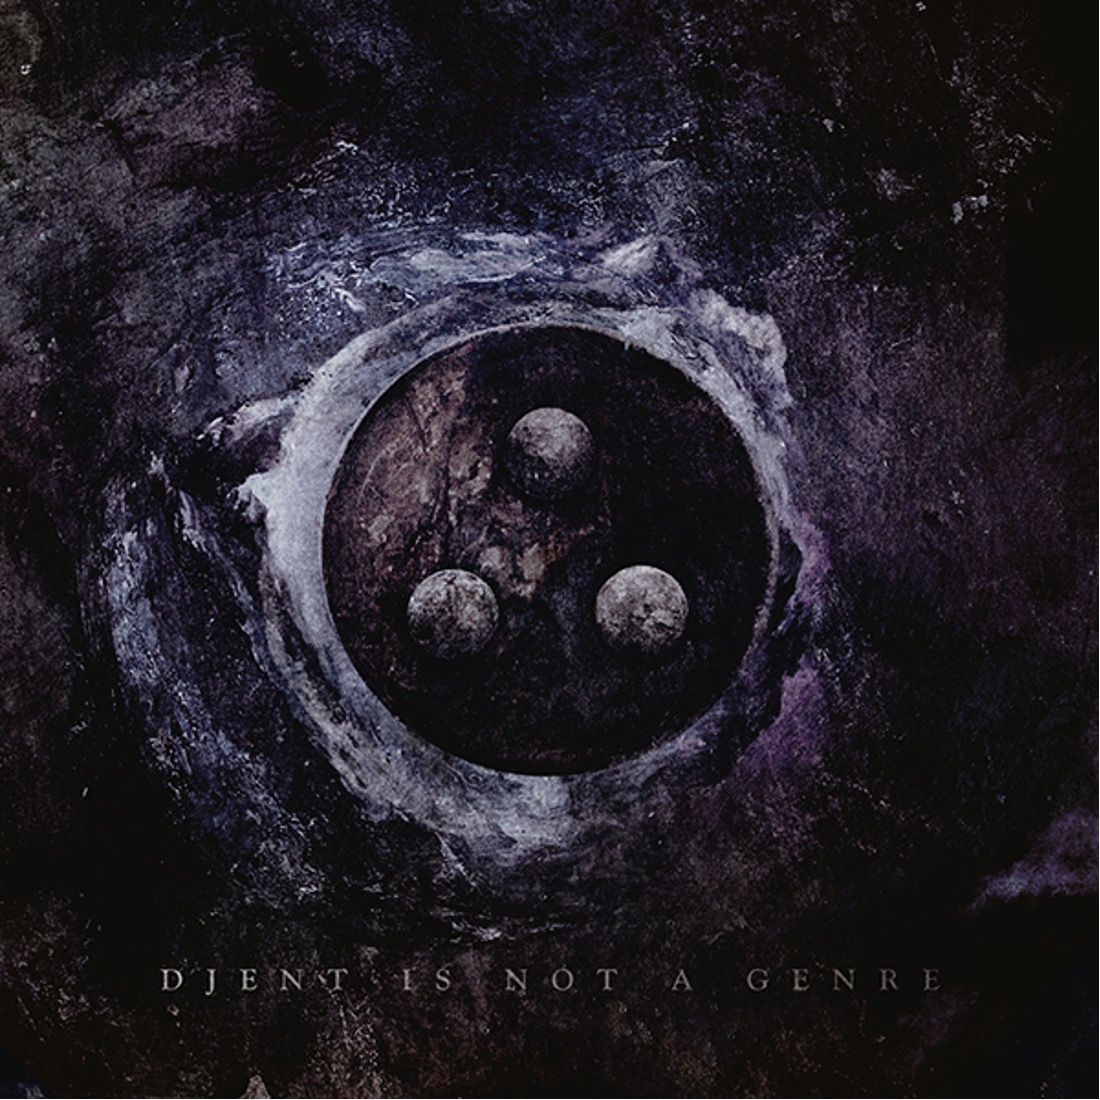 Periphery V: Djent Is Not a Genre